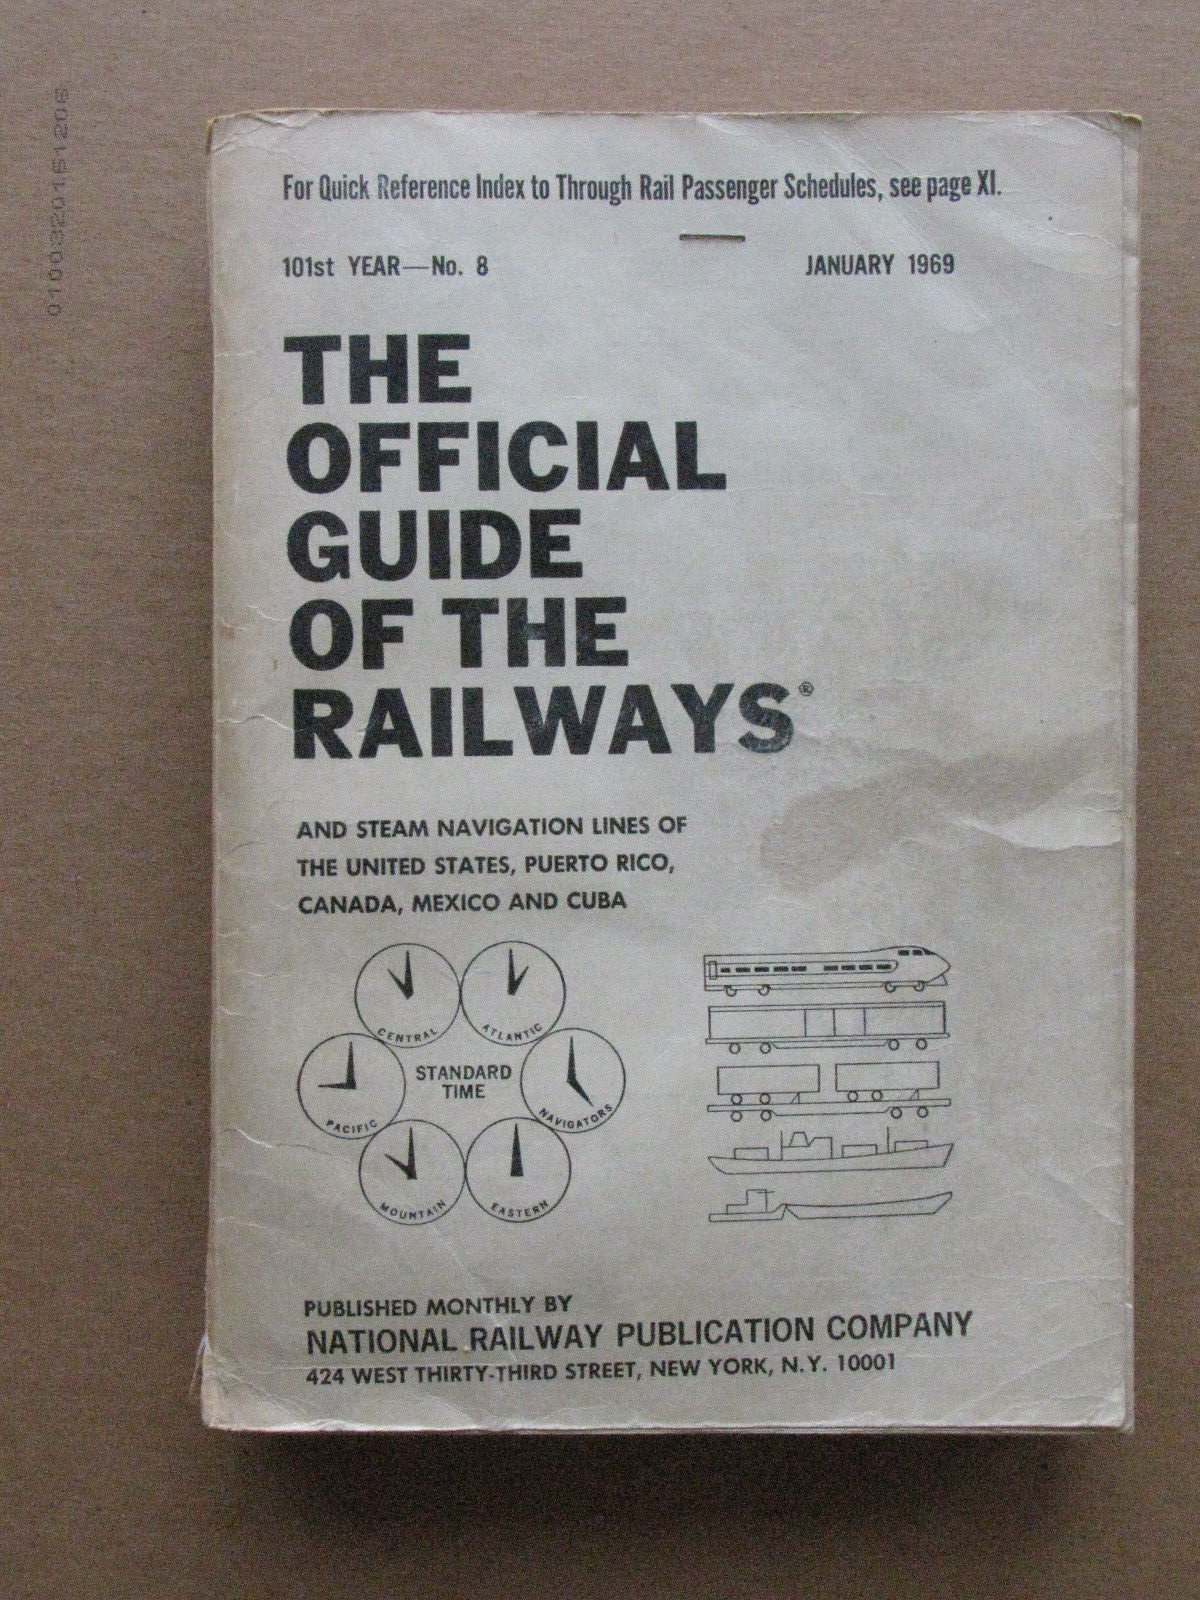 The Official Guide of the Railways, January 1969.  Used.